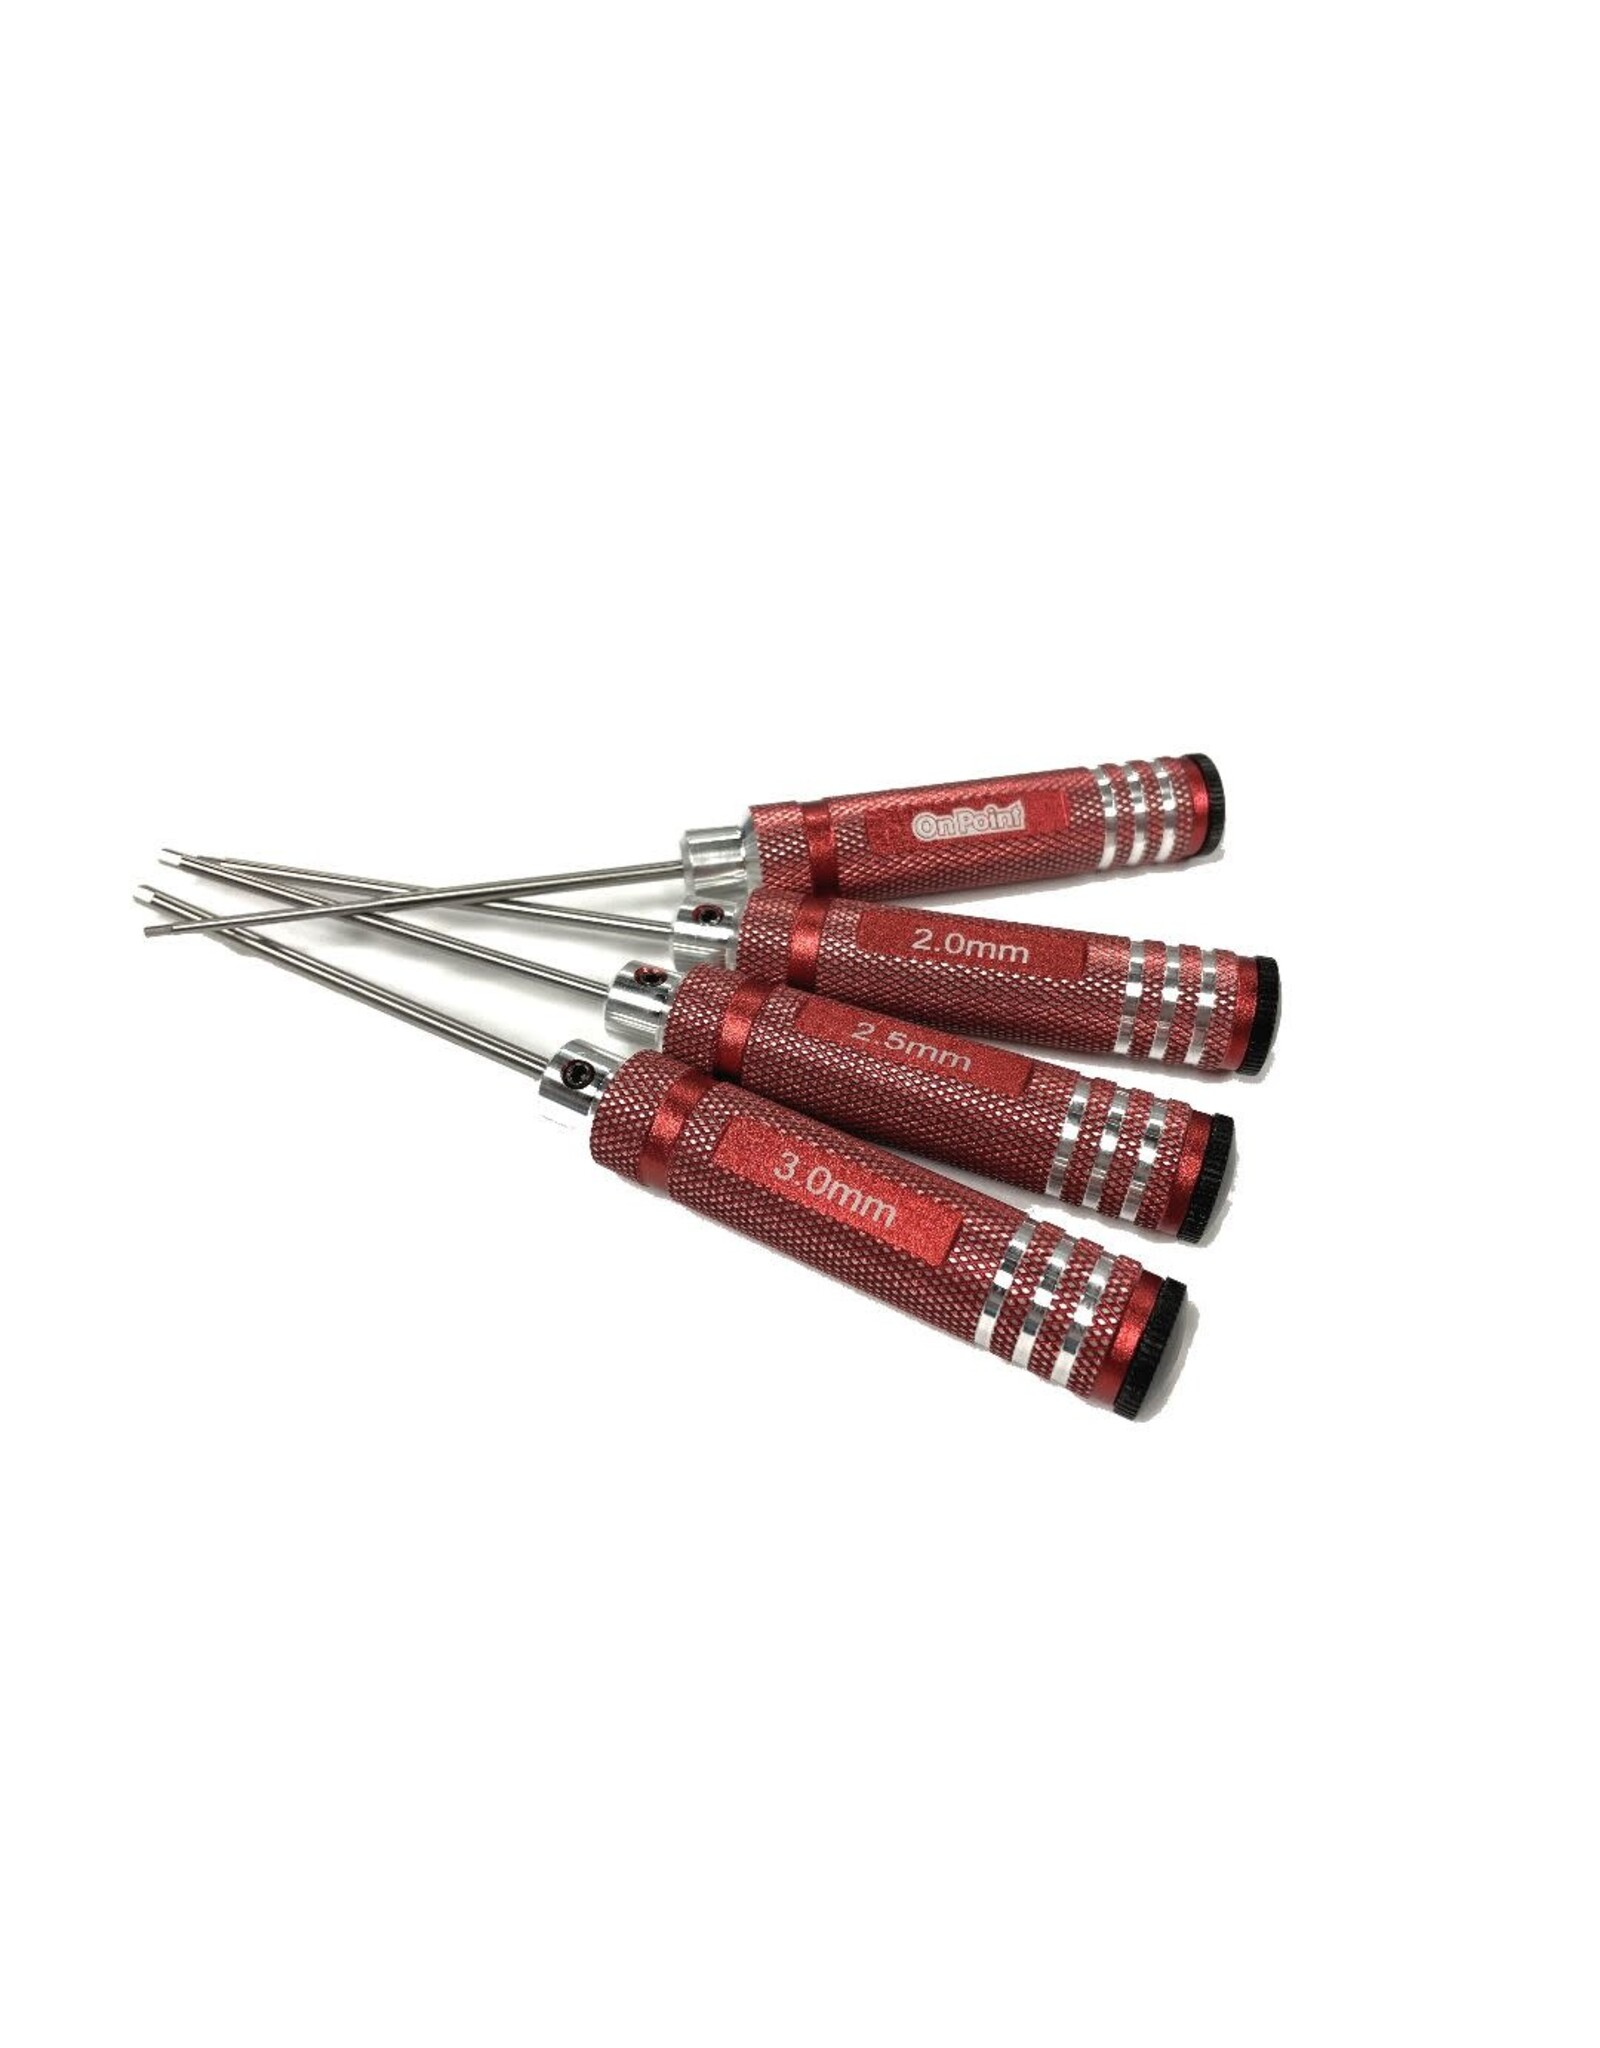 On Point Hex Screwdrivers (4) 1.5/2.0/2.5/3.0mm - Red